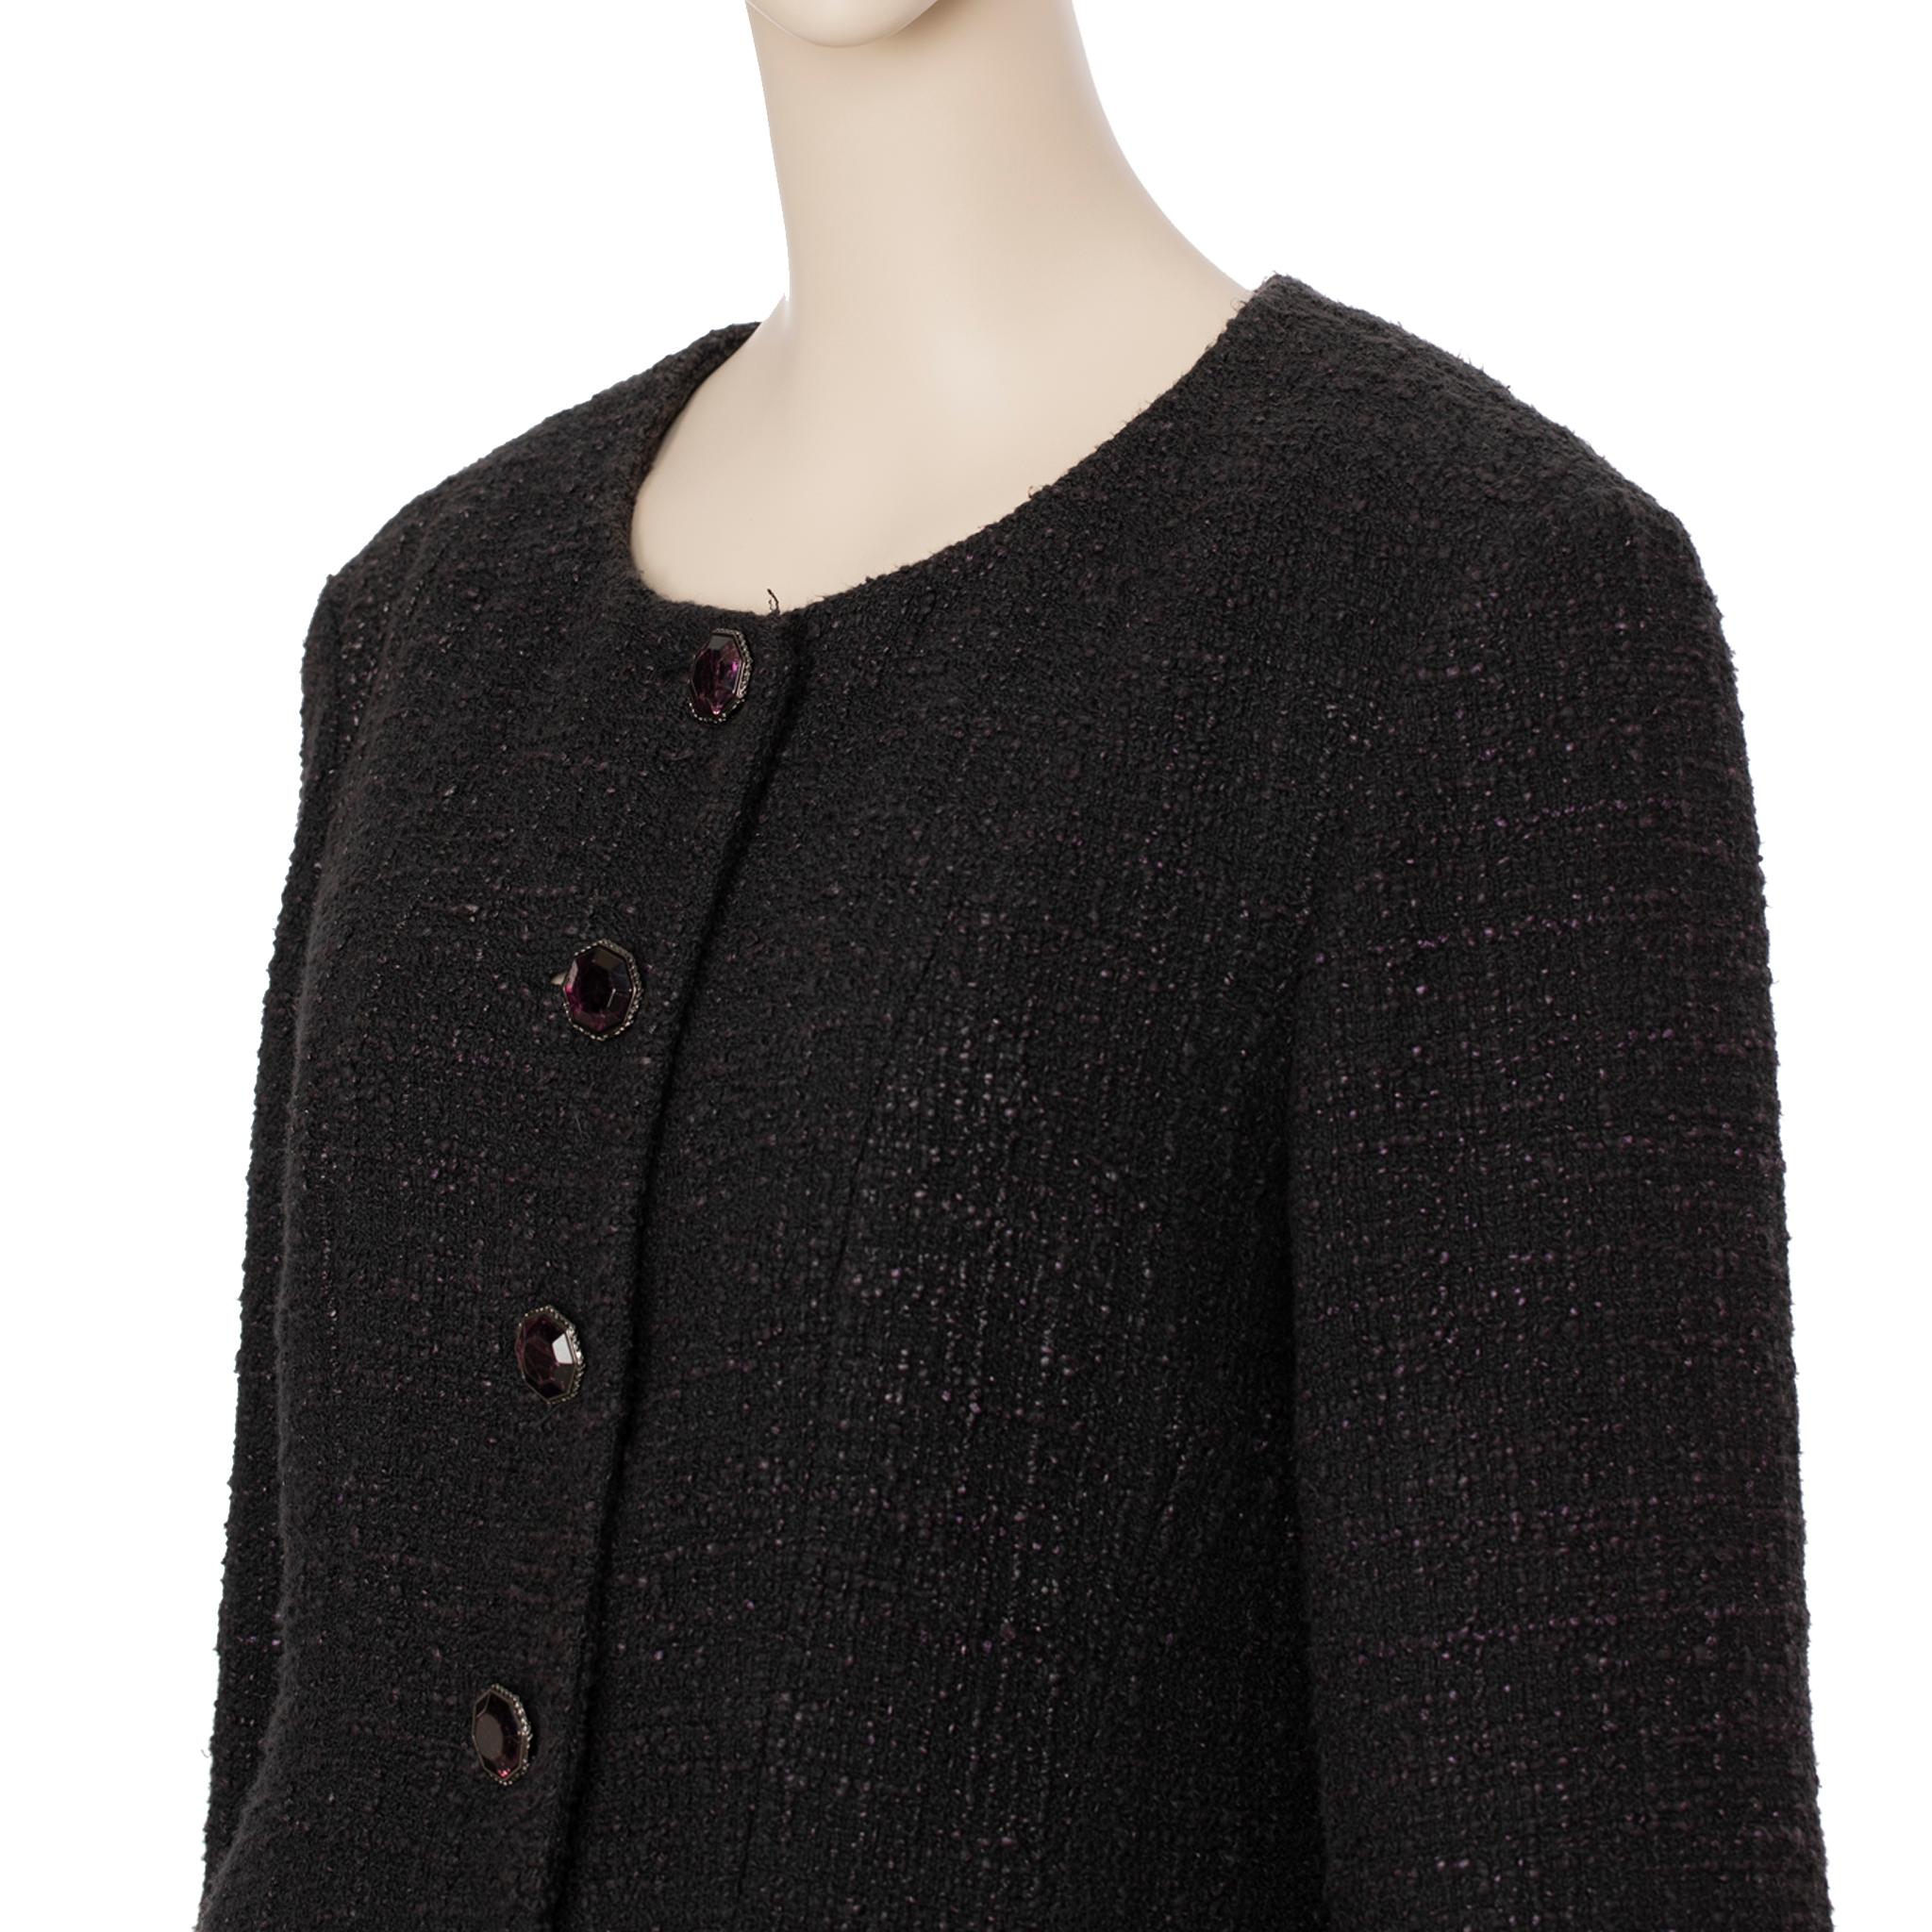 Chanel Tweed Multi-button Crew Neck Jacket 40 FR For Sale 6